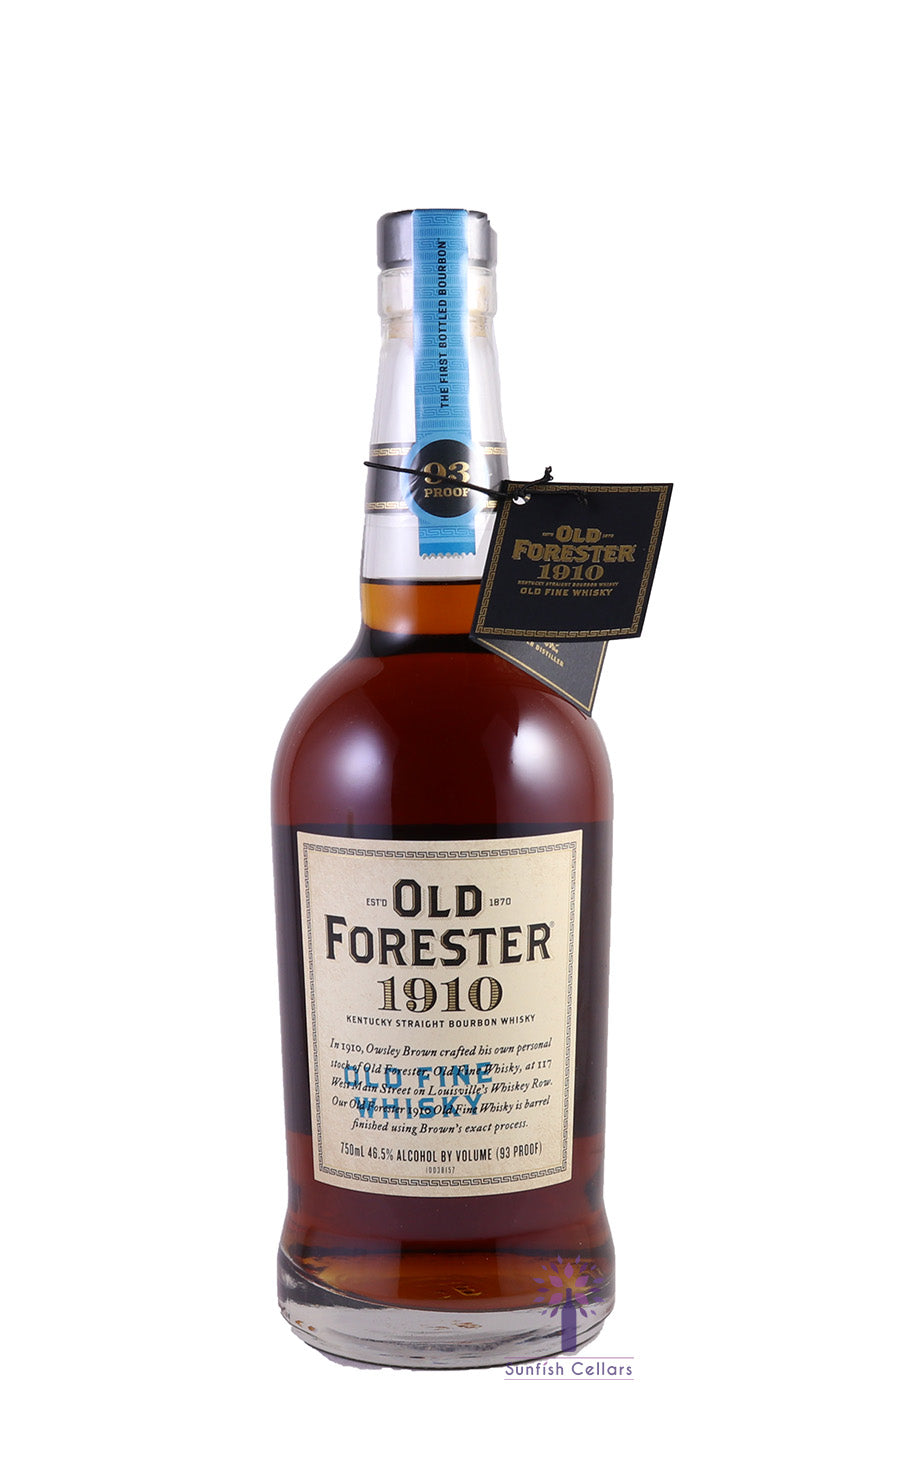 Old Forester 1910 Old Fine Bourbon 750ml